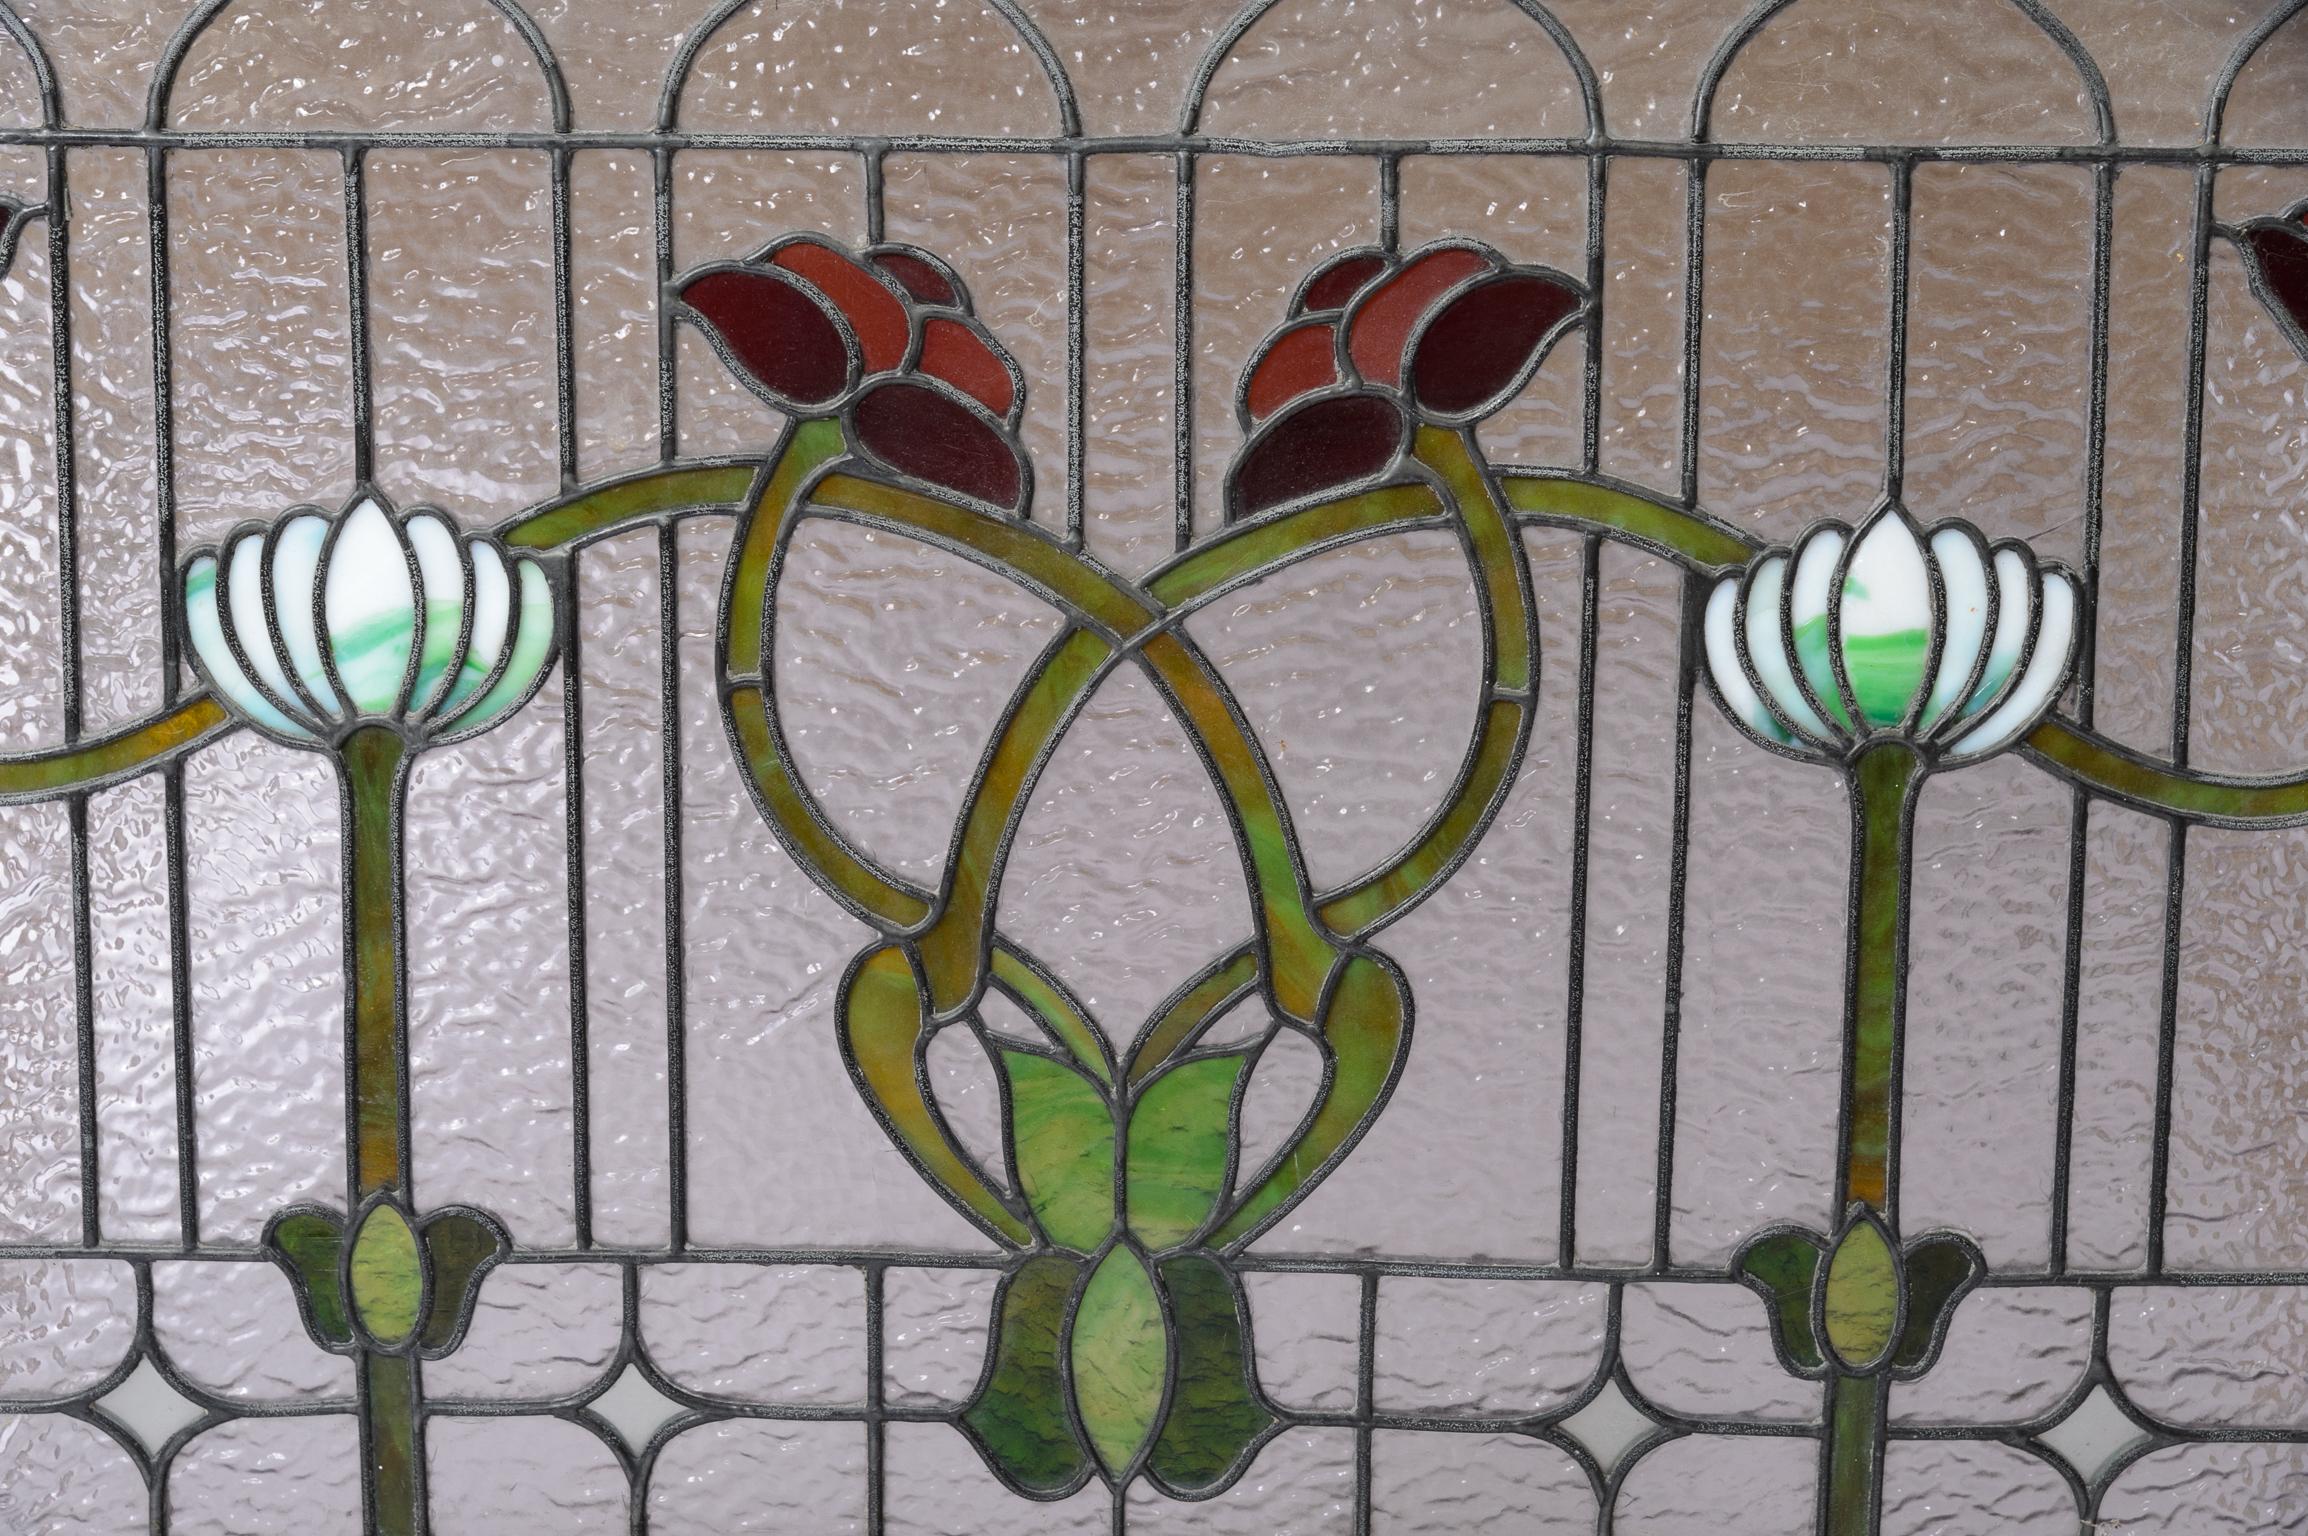 Vintage 1920-30s Stained Glass Window
Whiplash Art Nouveau Design featuring Poppies and Waterlilies 
Clear Ripple Glass Background pushes the design forward and acts to obscure 
A fine example of a Cincinnati Window
Glass in very good